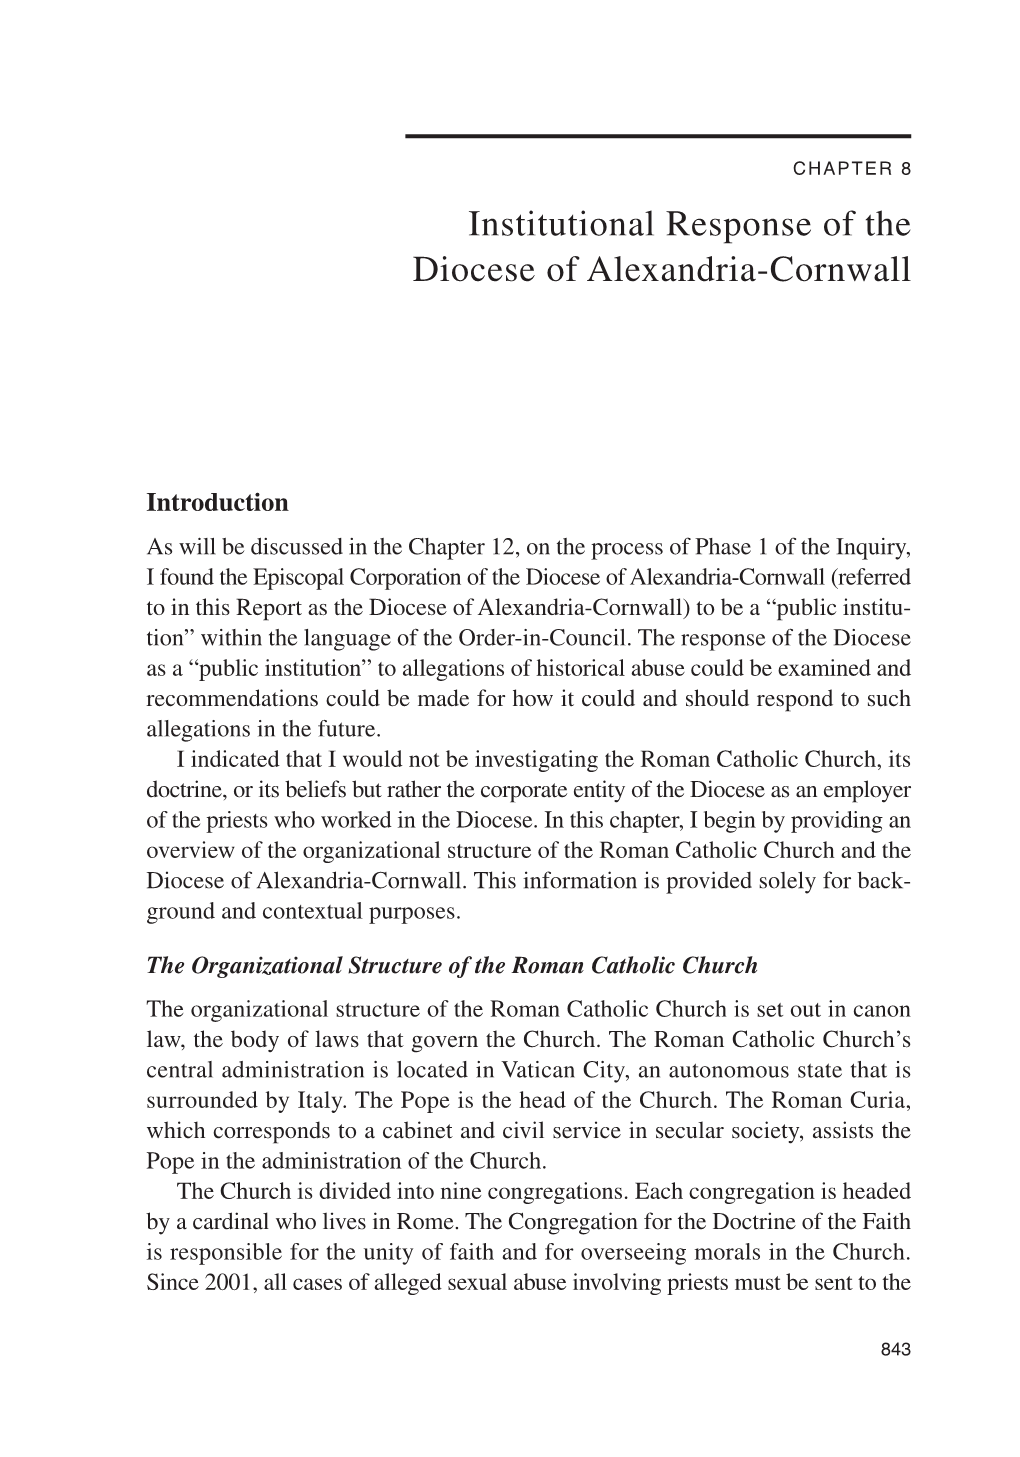 Institutional Response of the Diocese of Alexandria-Cornwall